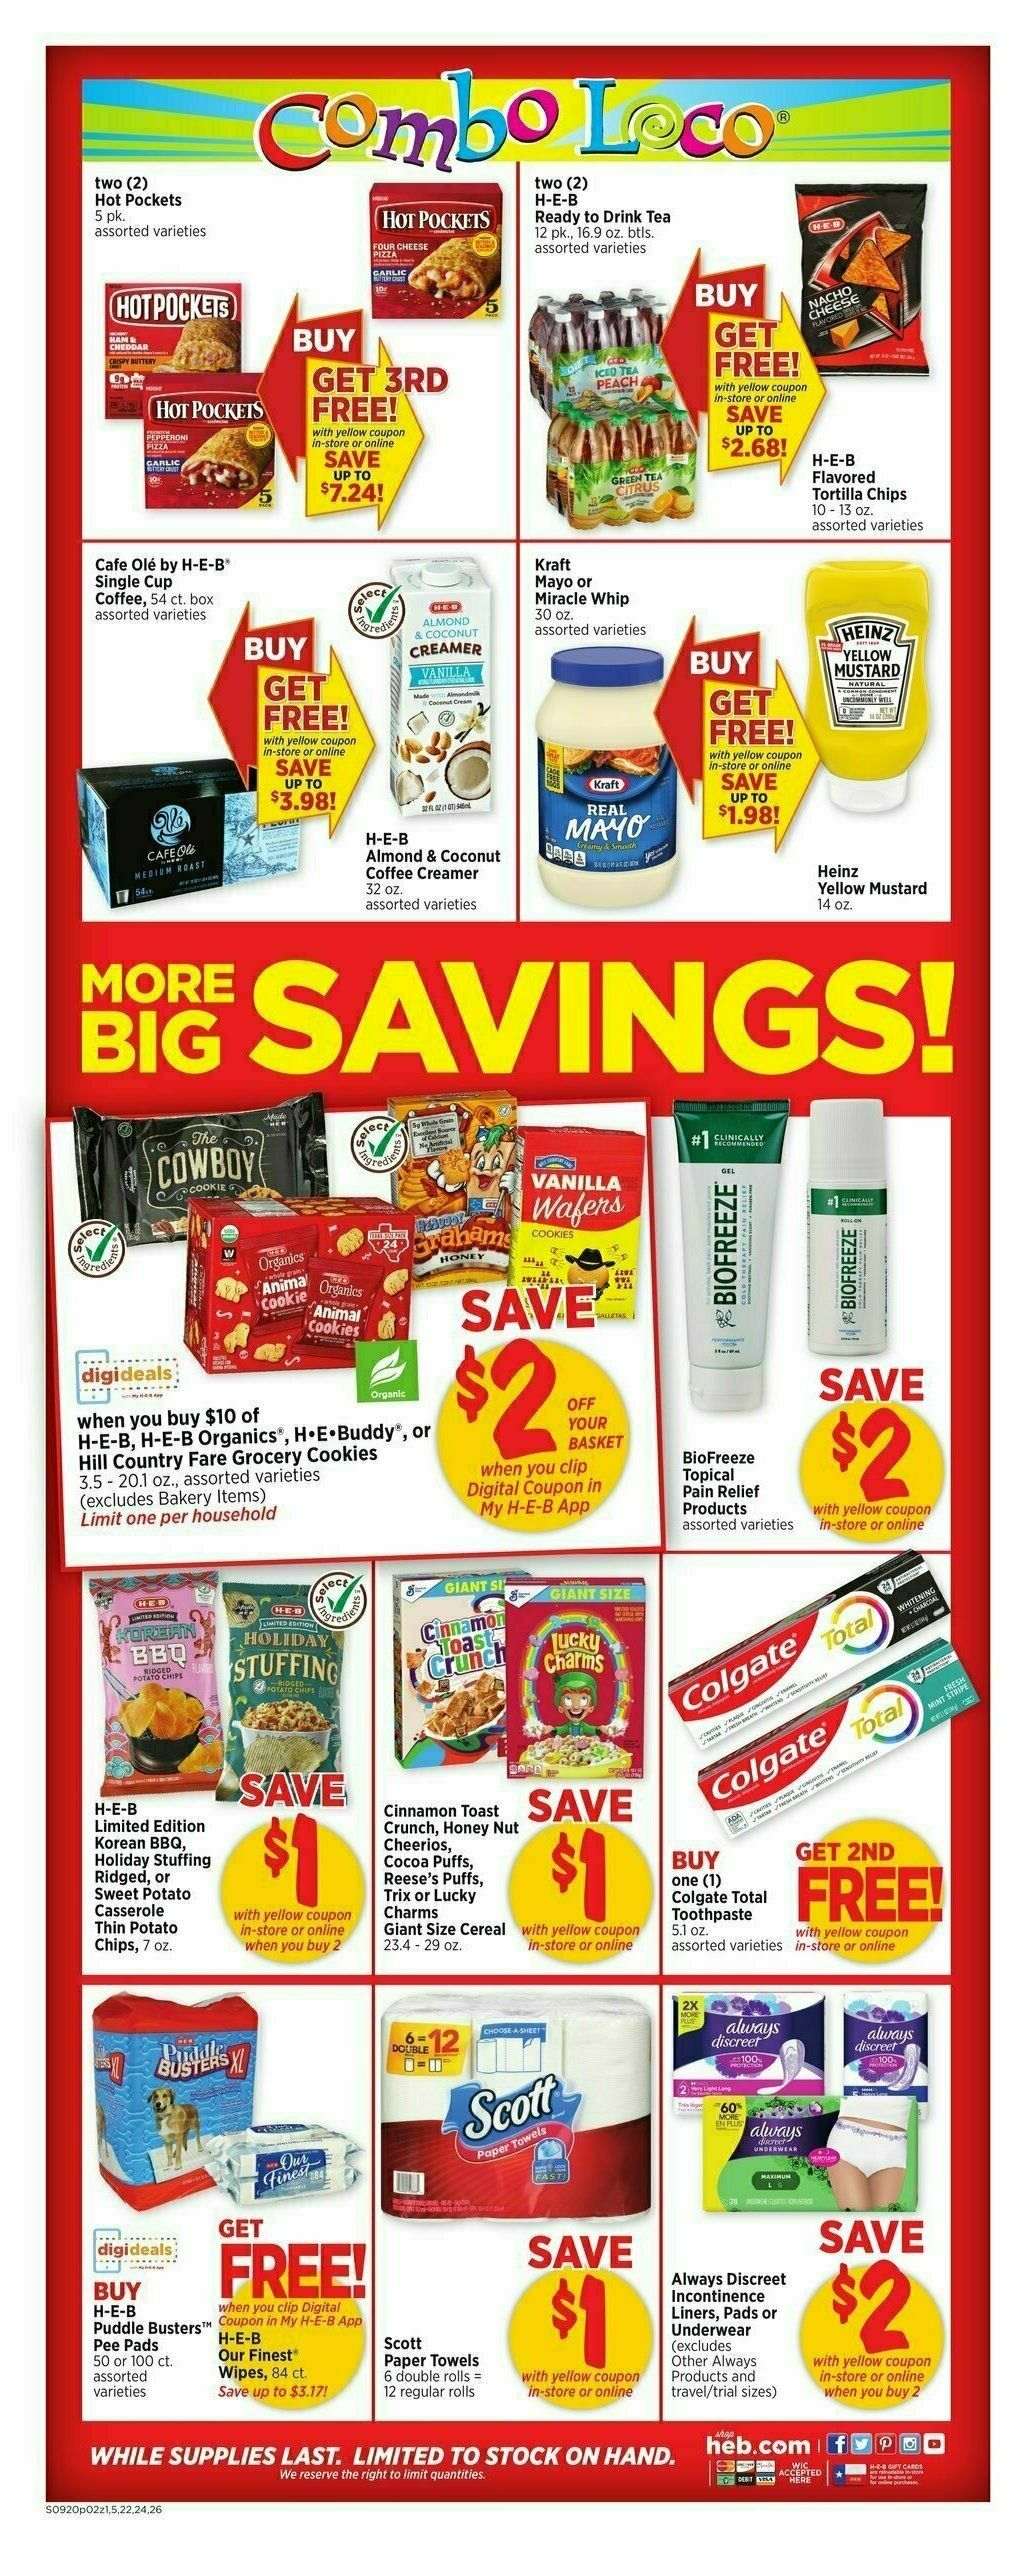 H-E-B Weekly Ad from September 20